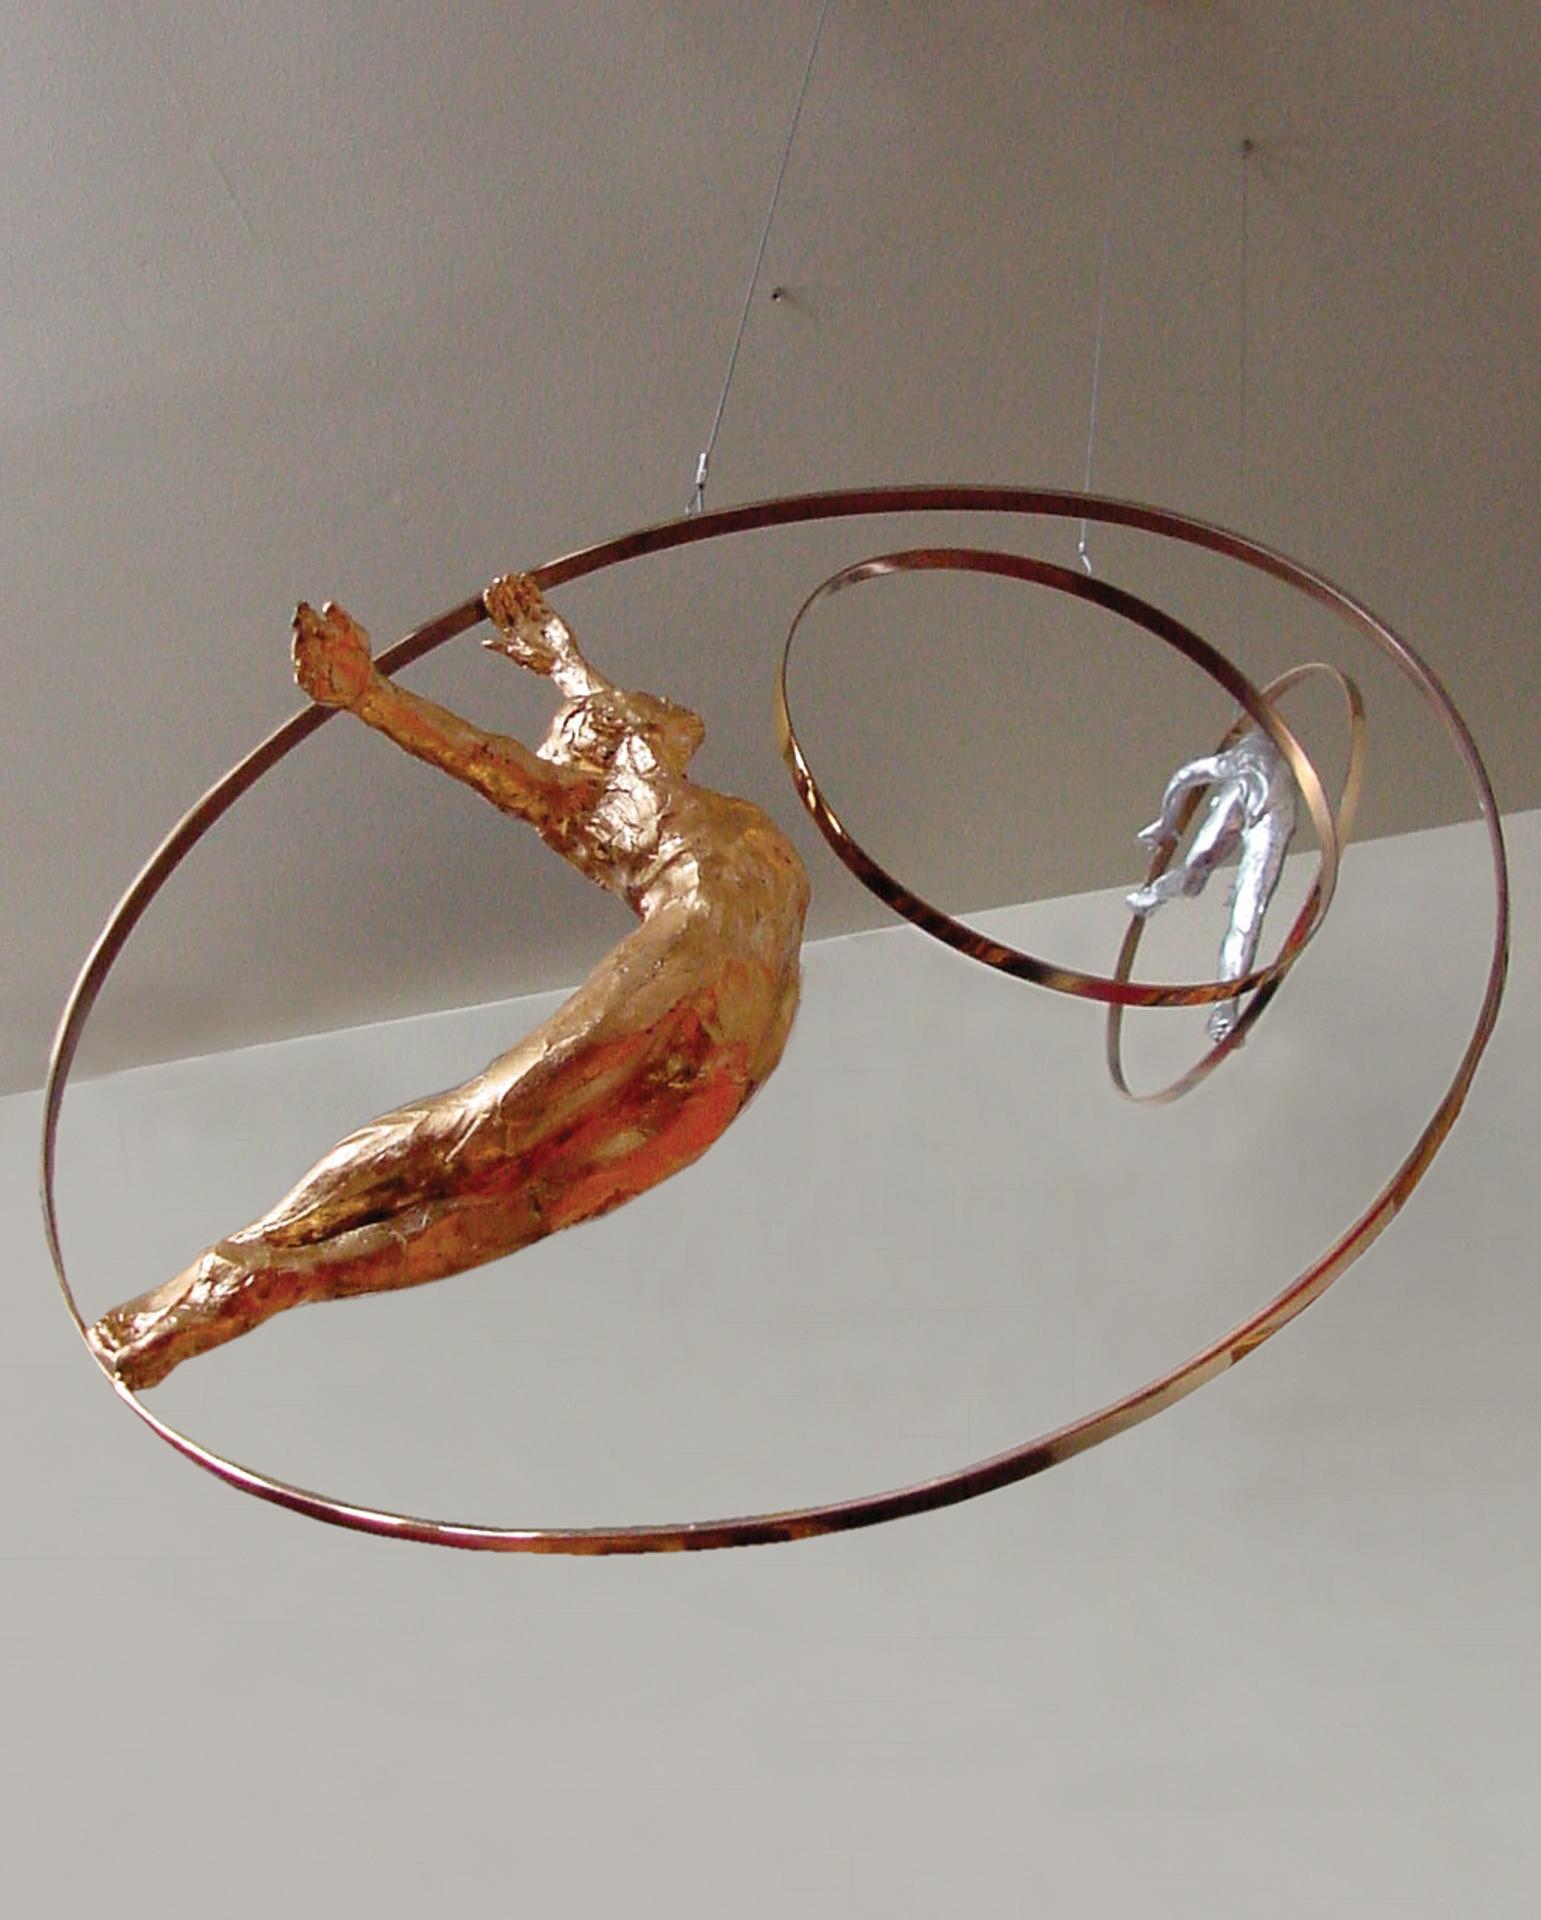 Dance Within - Wear Only Sky (suspended) - Sculpture by Denny Haskew